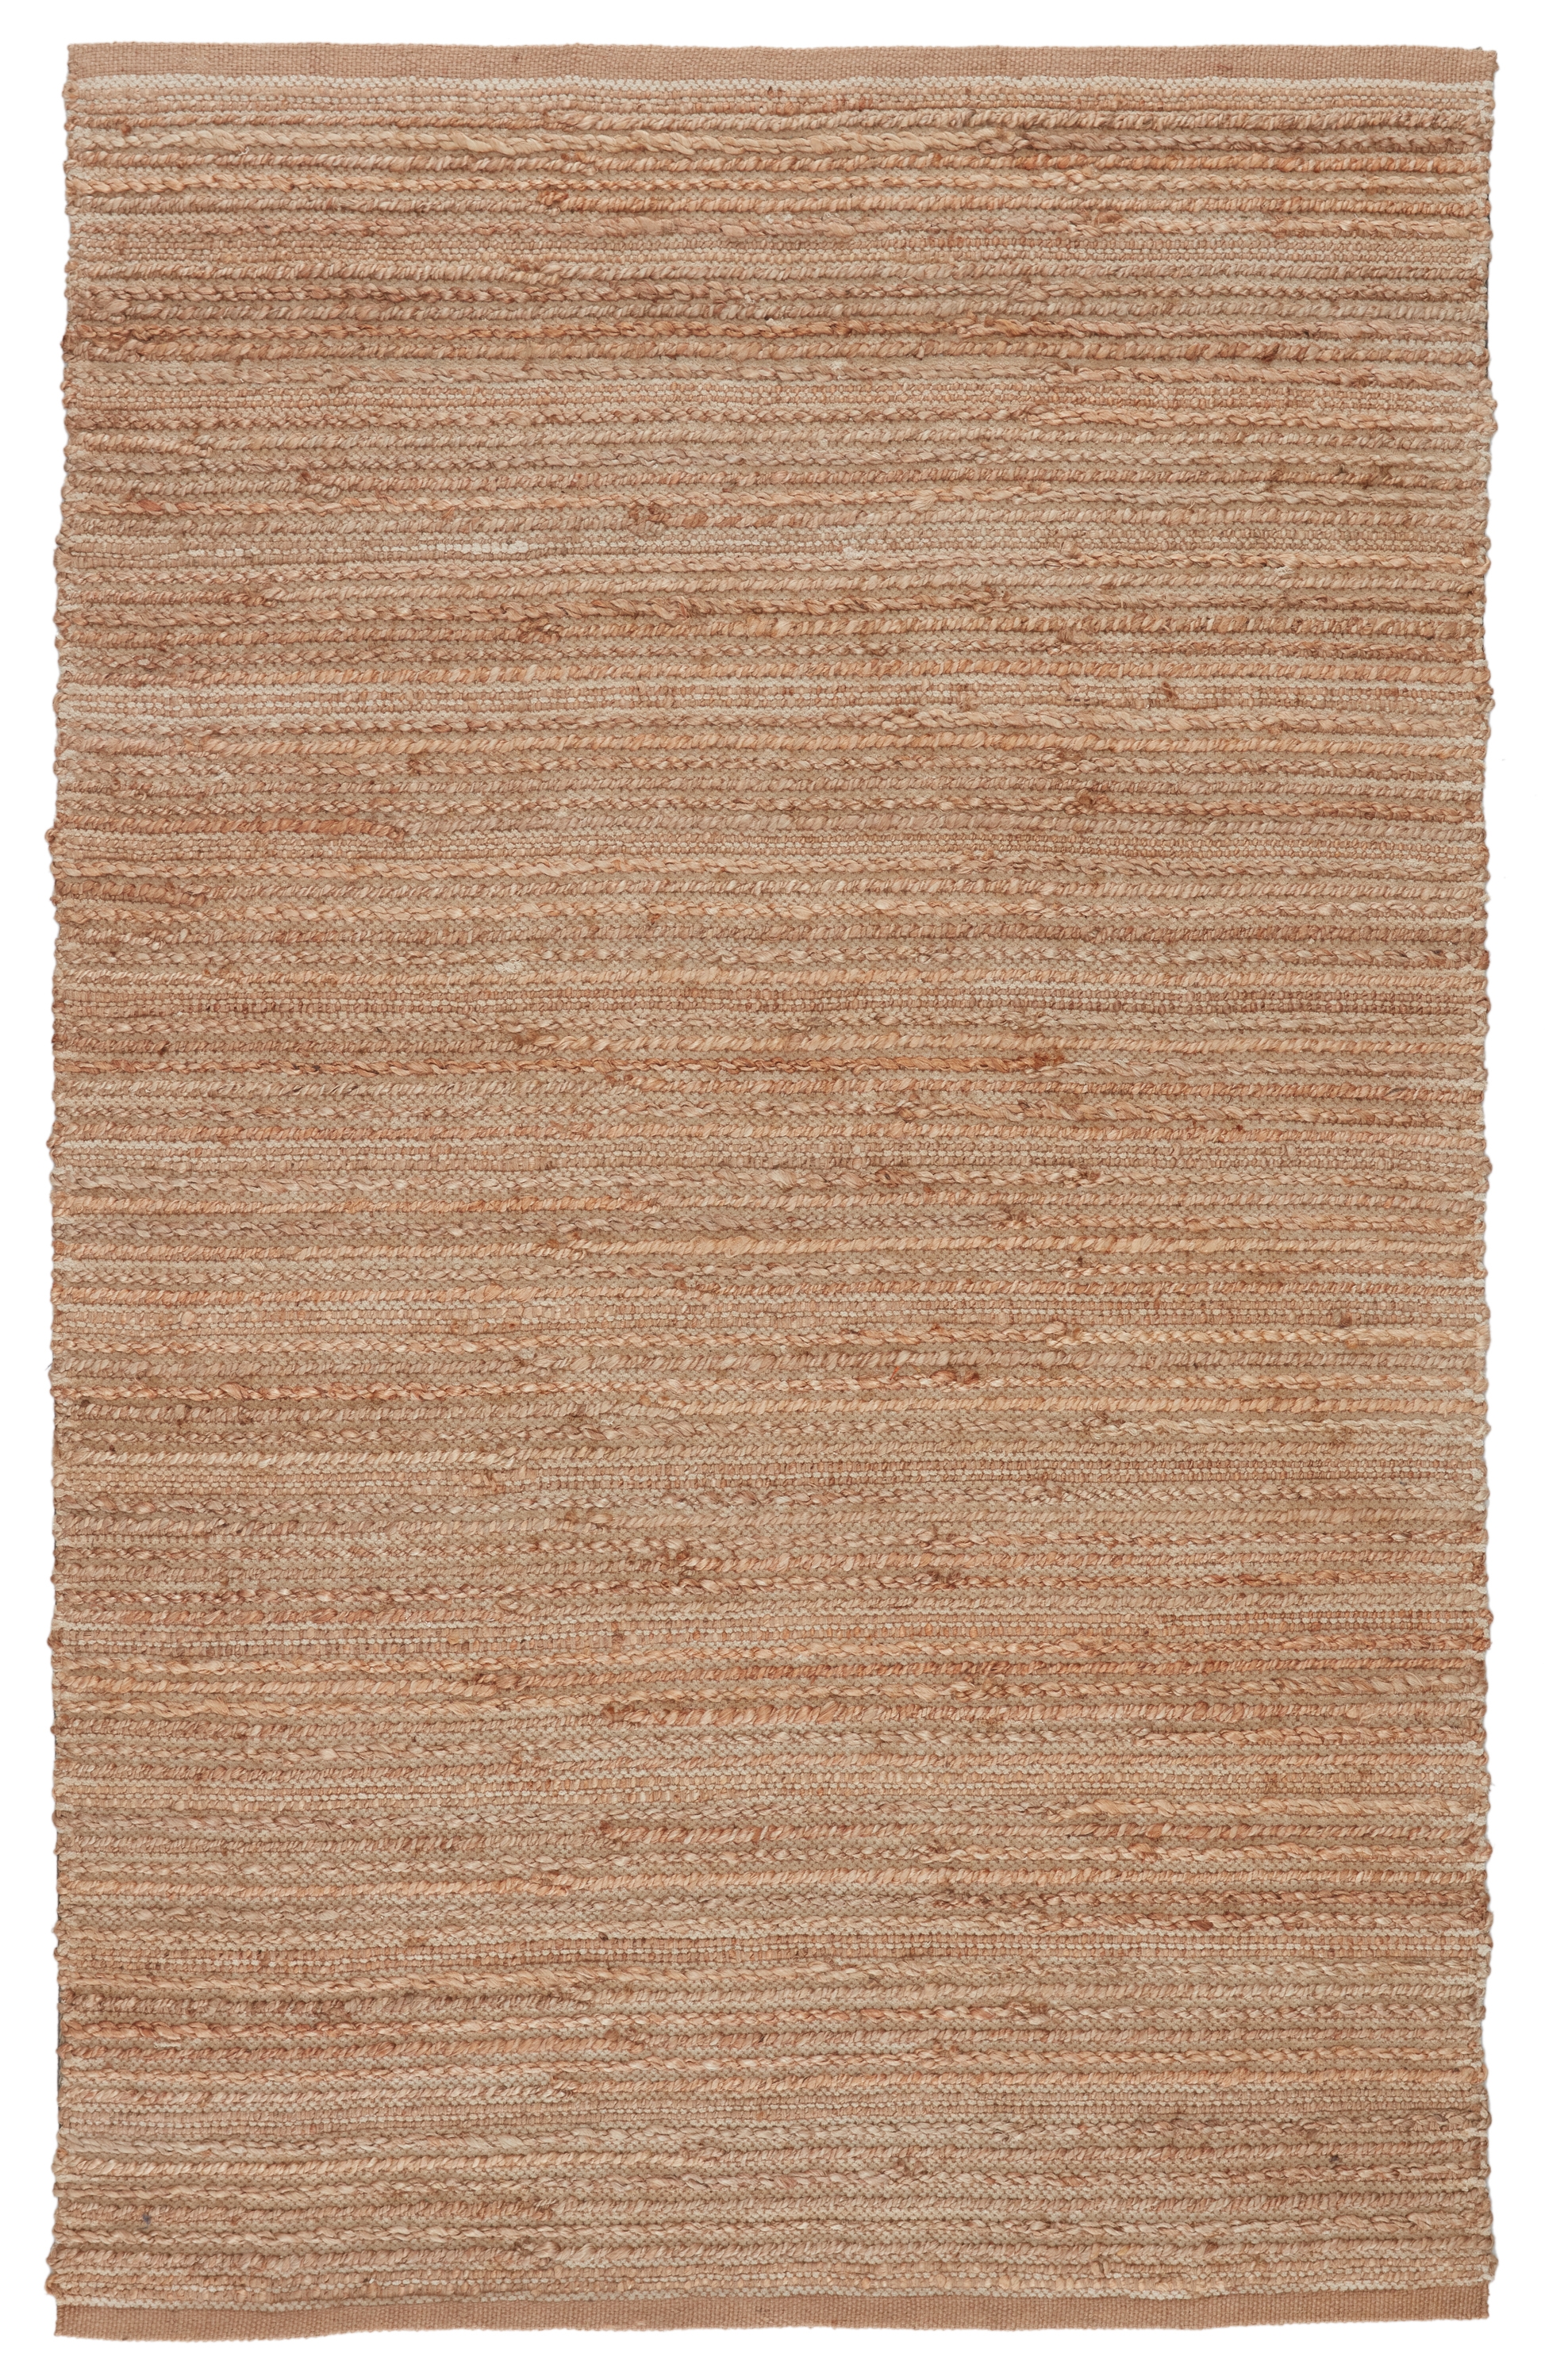 Clifton Natural Solid Tan/ White Area Rug (8' X 10') - Image 0